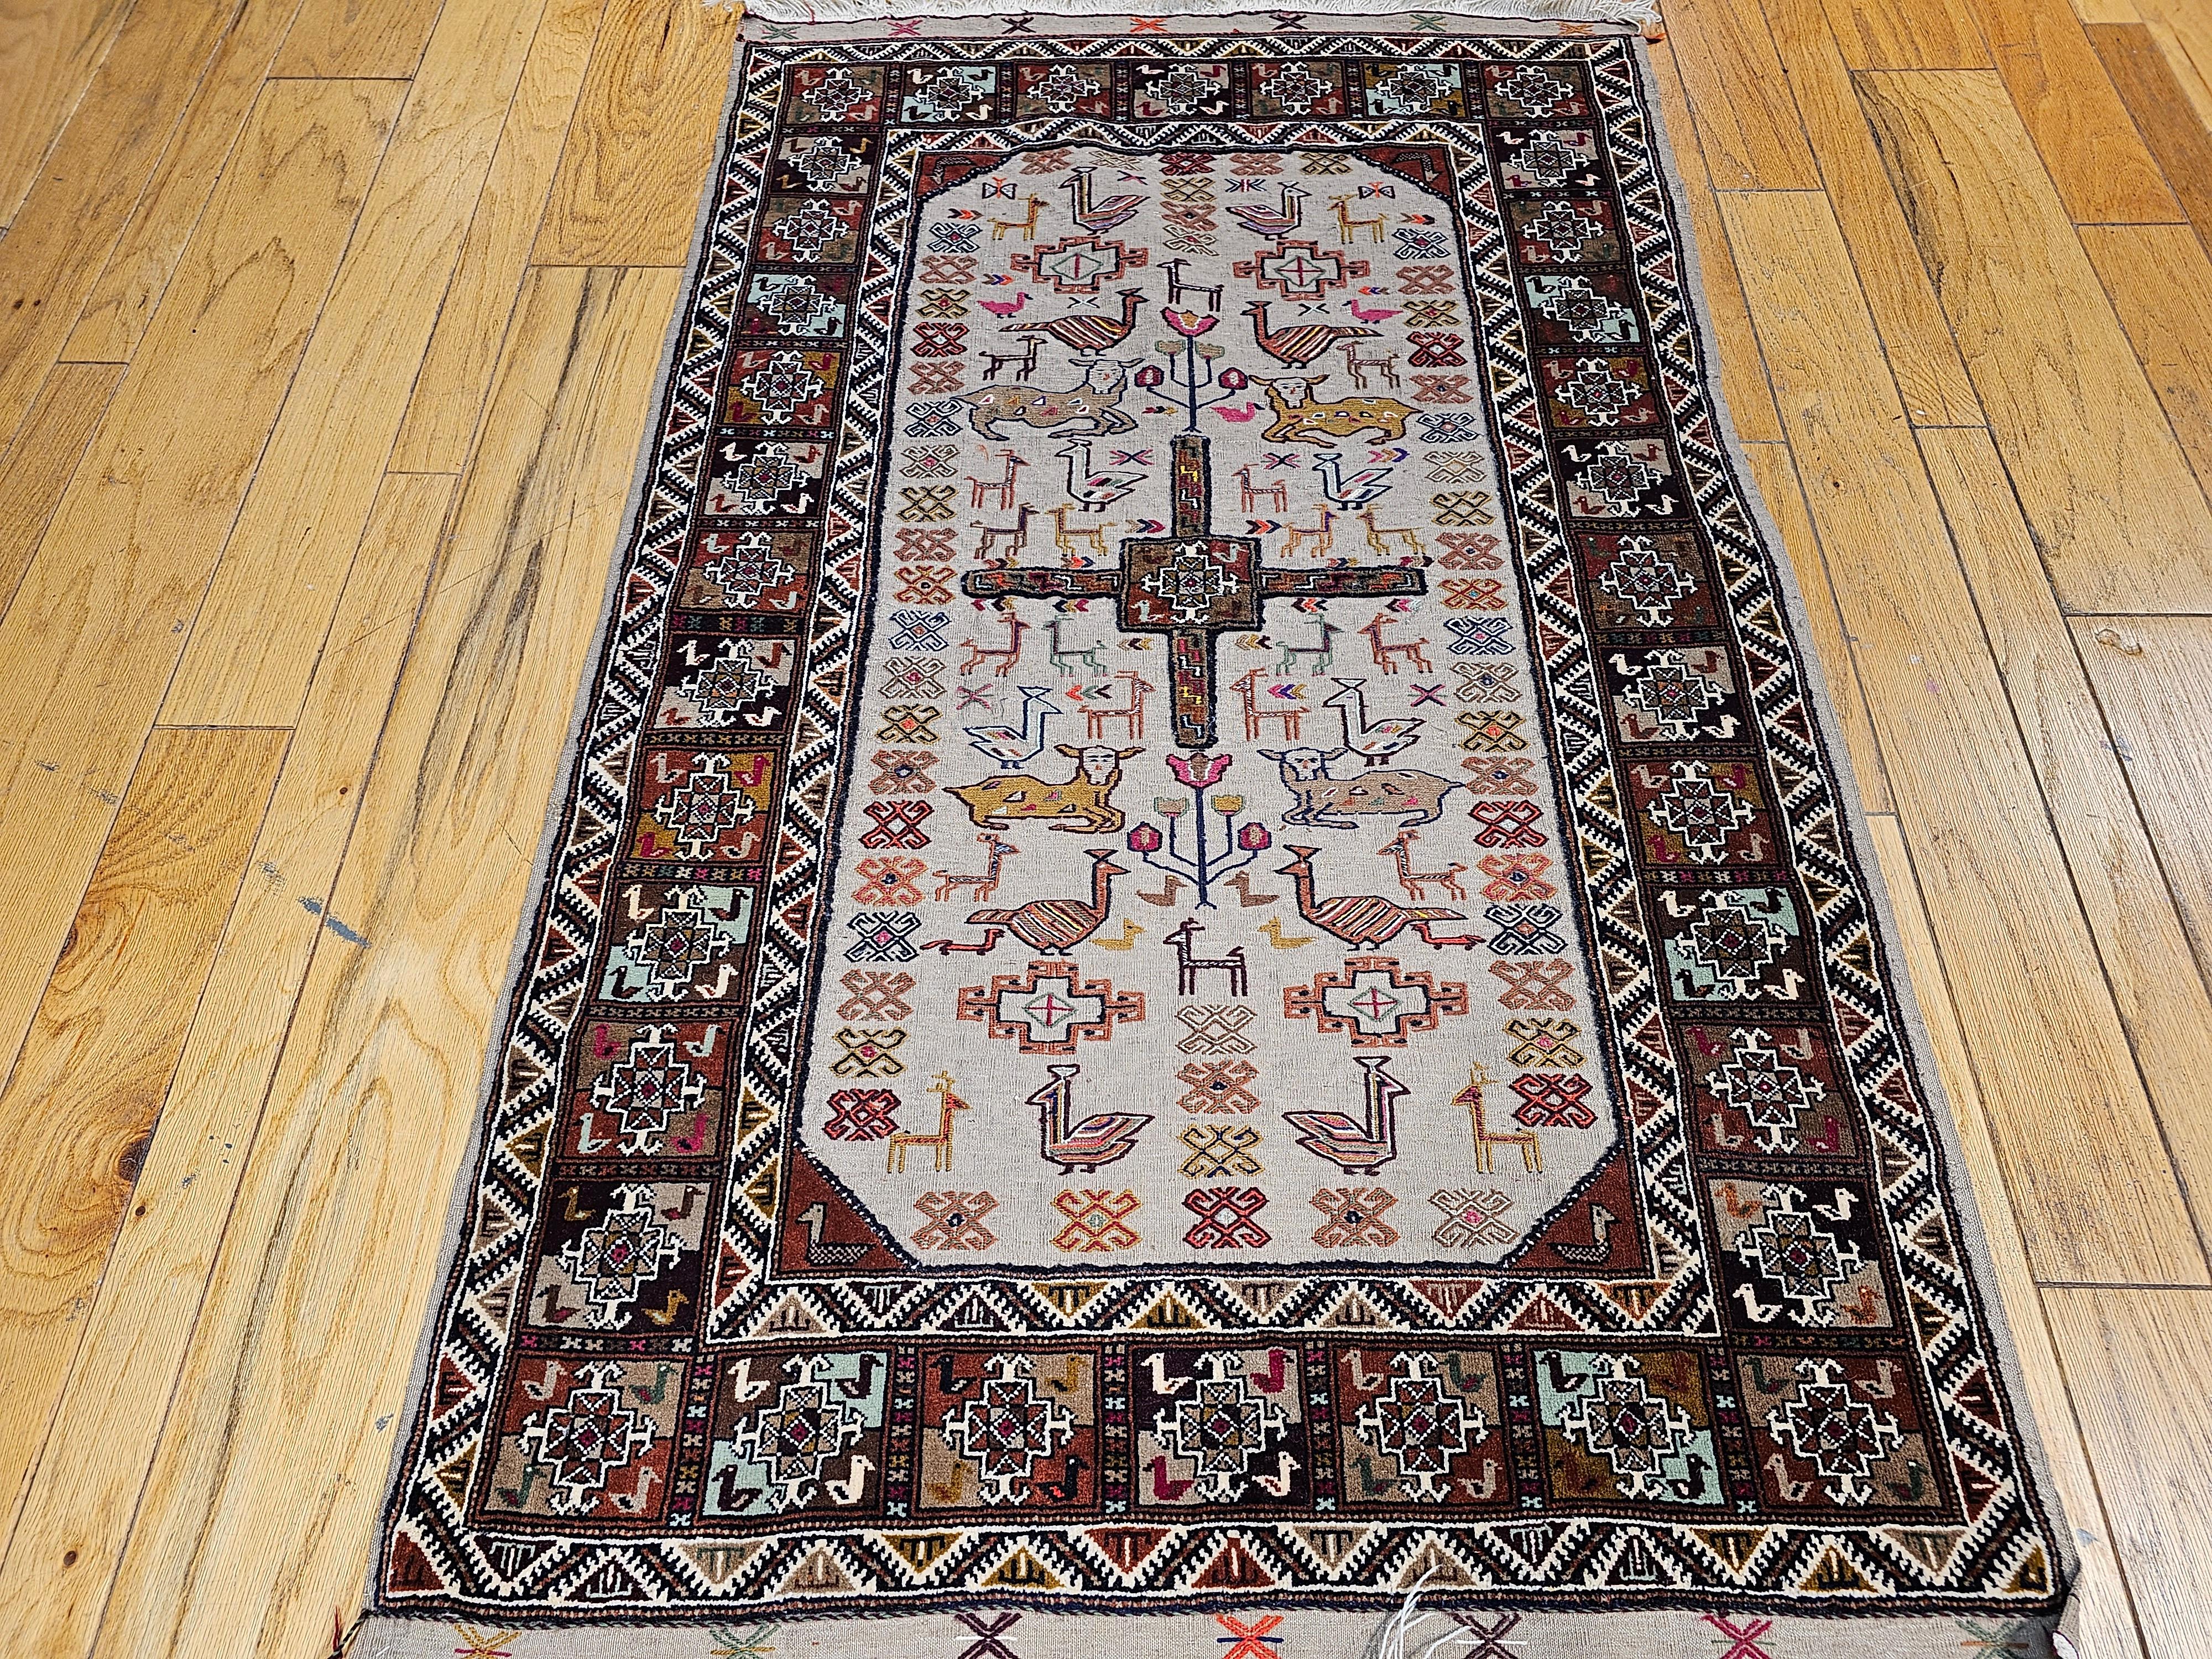 Vintage Hand-Woven Persian Qashqai Tribal Tapestry in Tree of Life Pattern For Sale 8